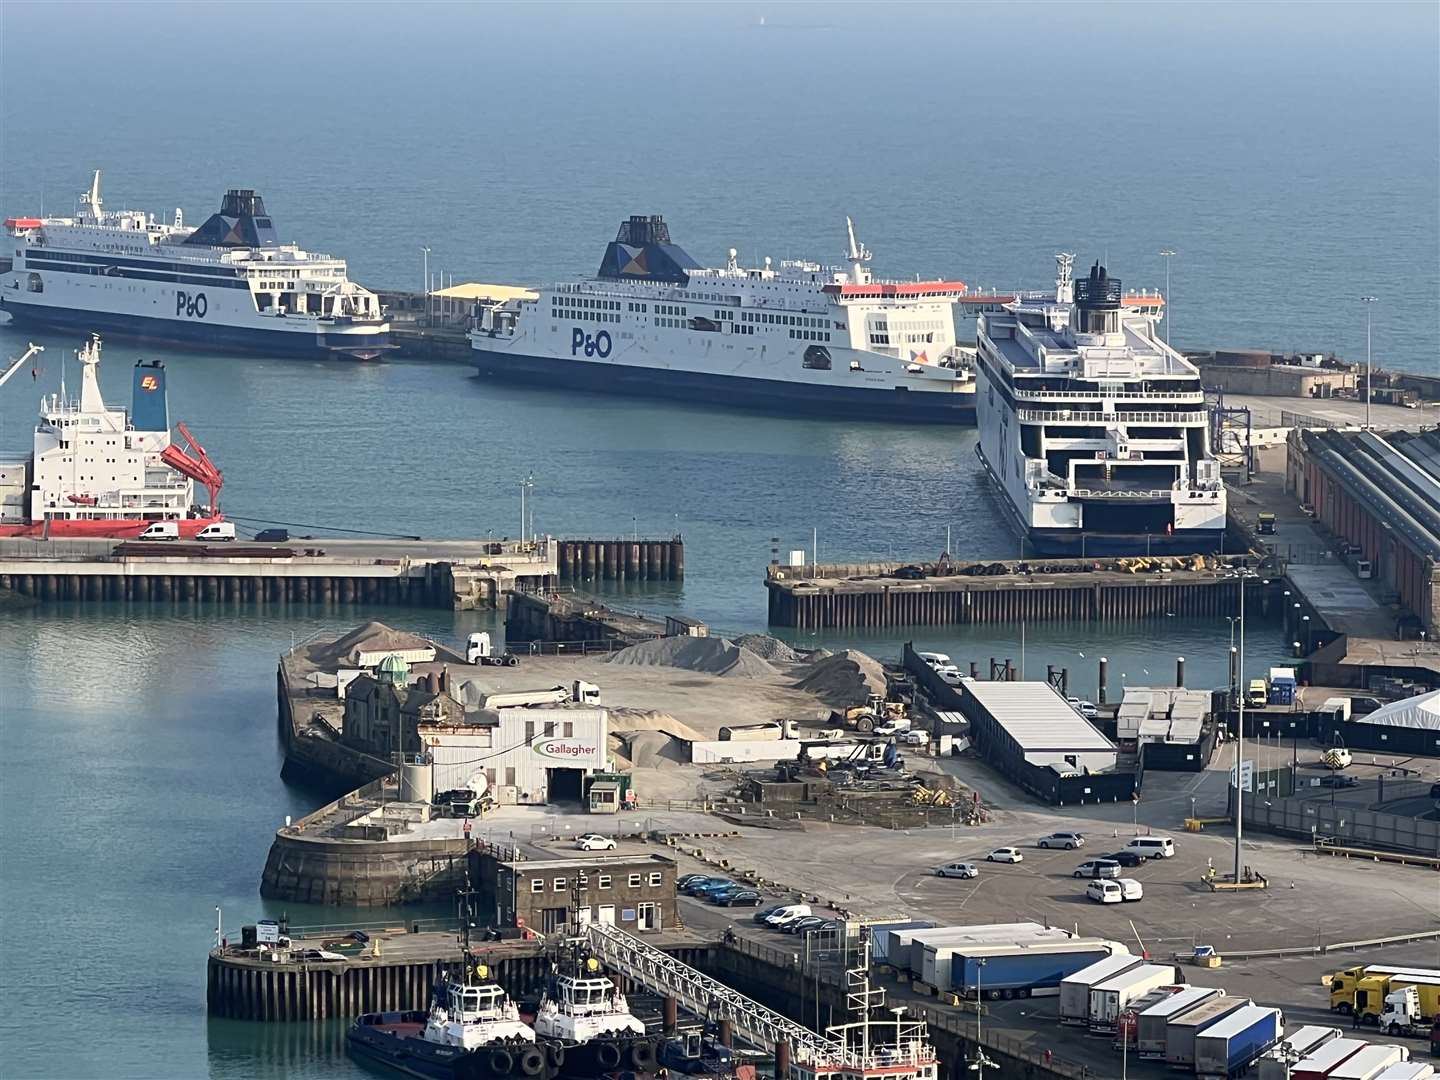 P&O Ferries vessels have been moored up since it dismissed close to 800 staff last month. Picture: Barry Goodwin